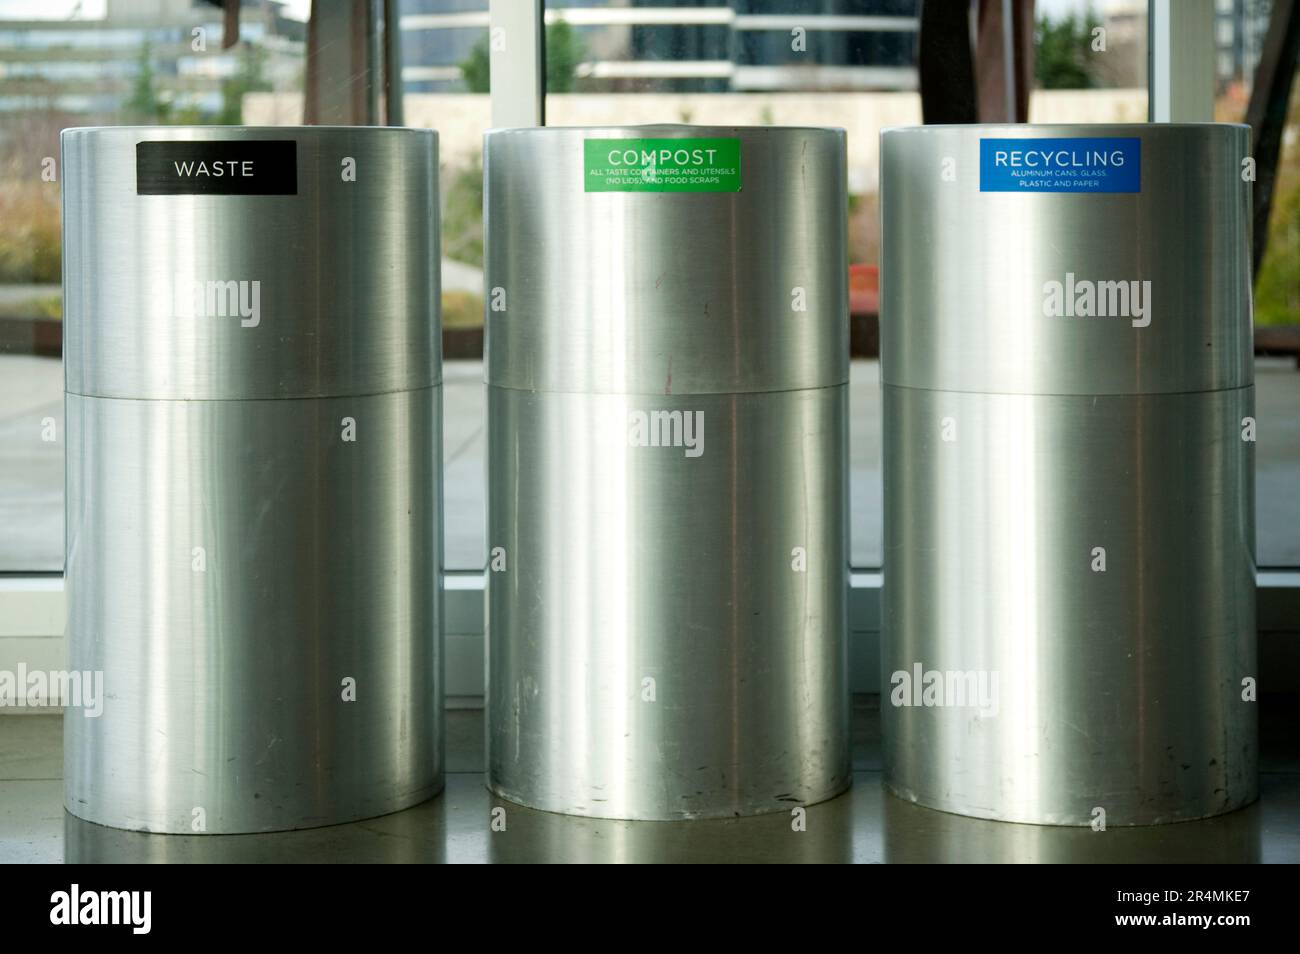 Three metal bins in a row indicating Waste, Compost and Recycling. Stock Photo